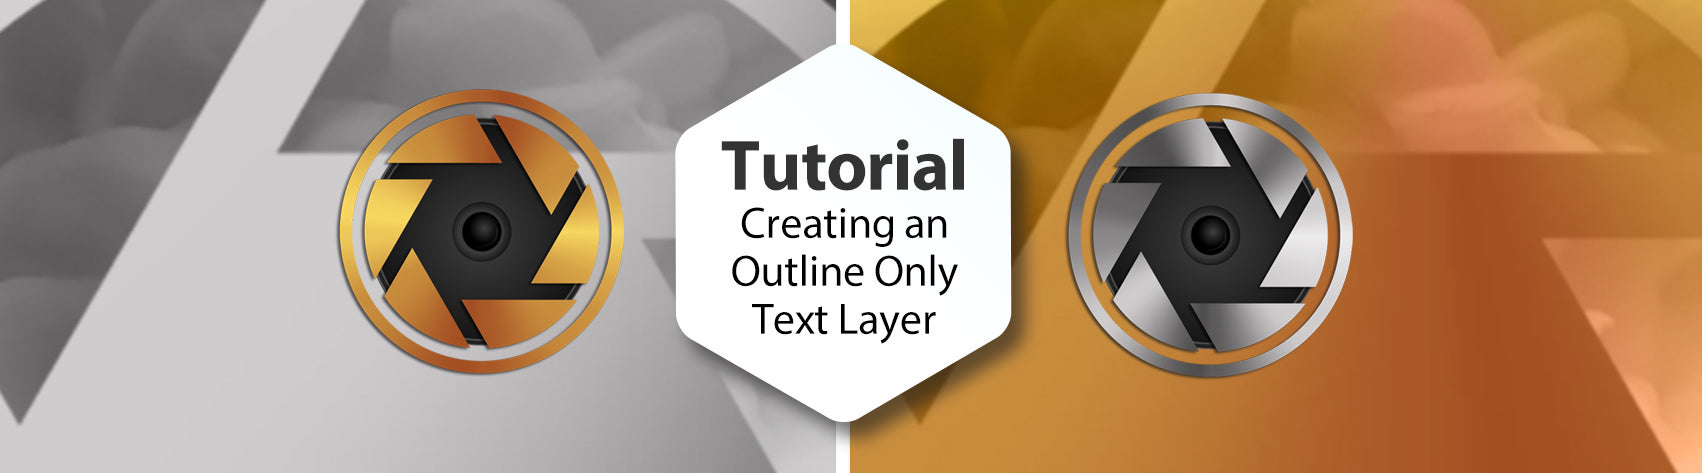 Tutorial - Creating an Outline Only Text Layer